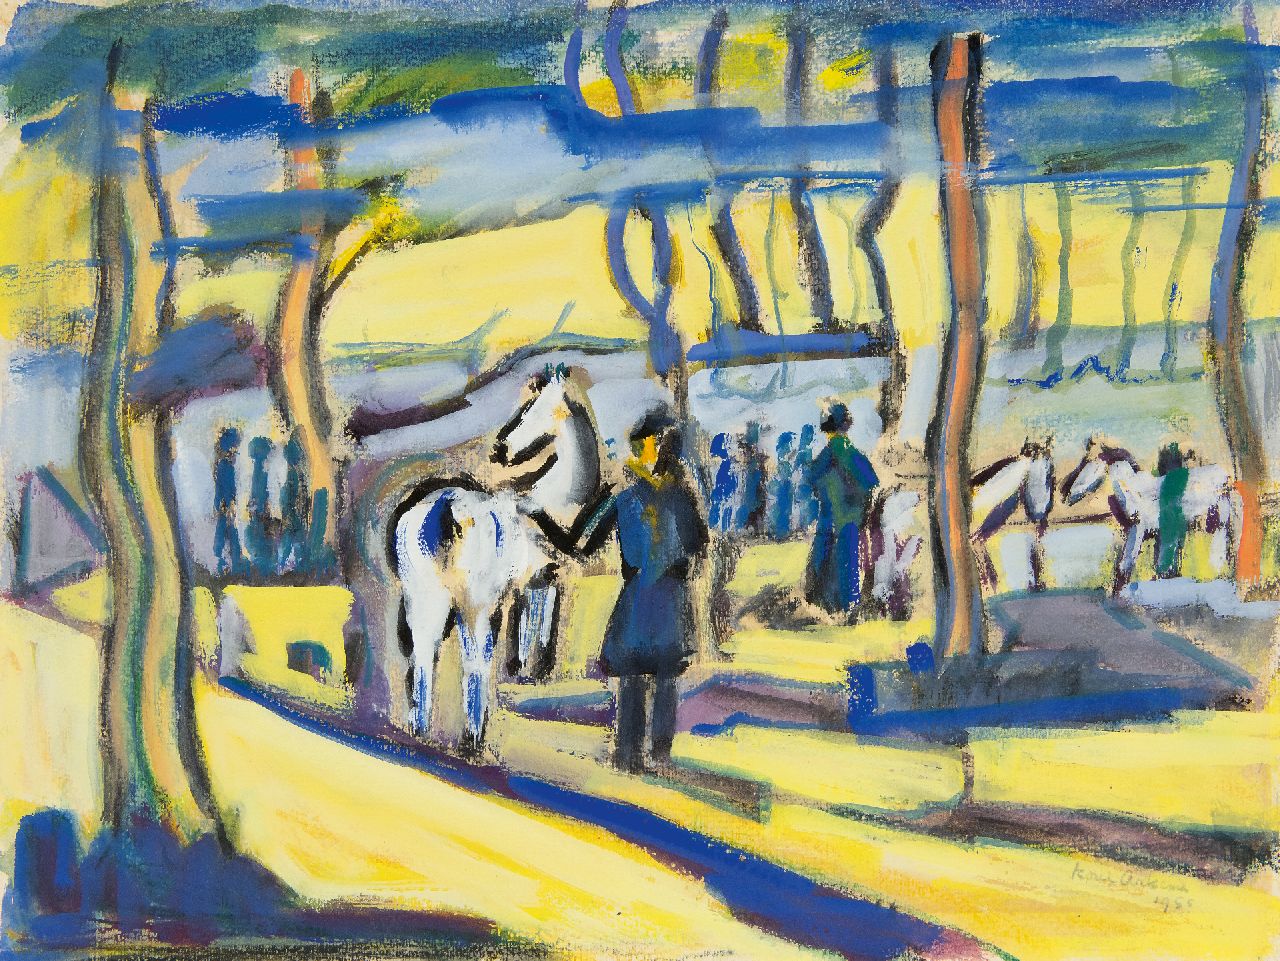 Karel Arkema | Figures and horses in a colored landscape, gouache on paper, 37.5 x 49.7 cm, signed l.r. and dated 1955